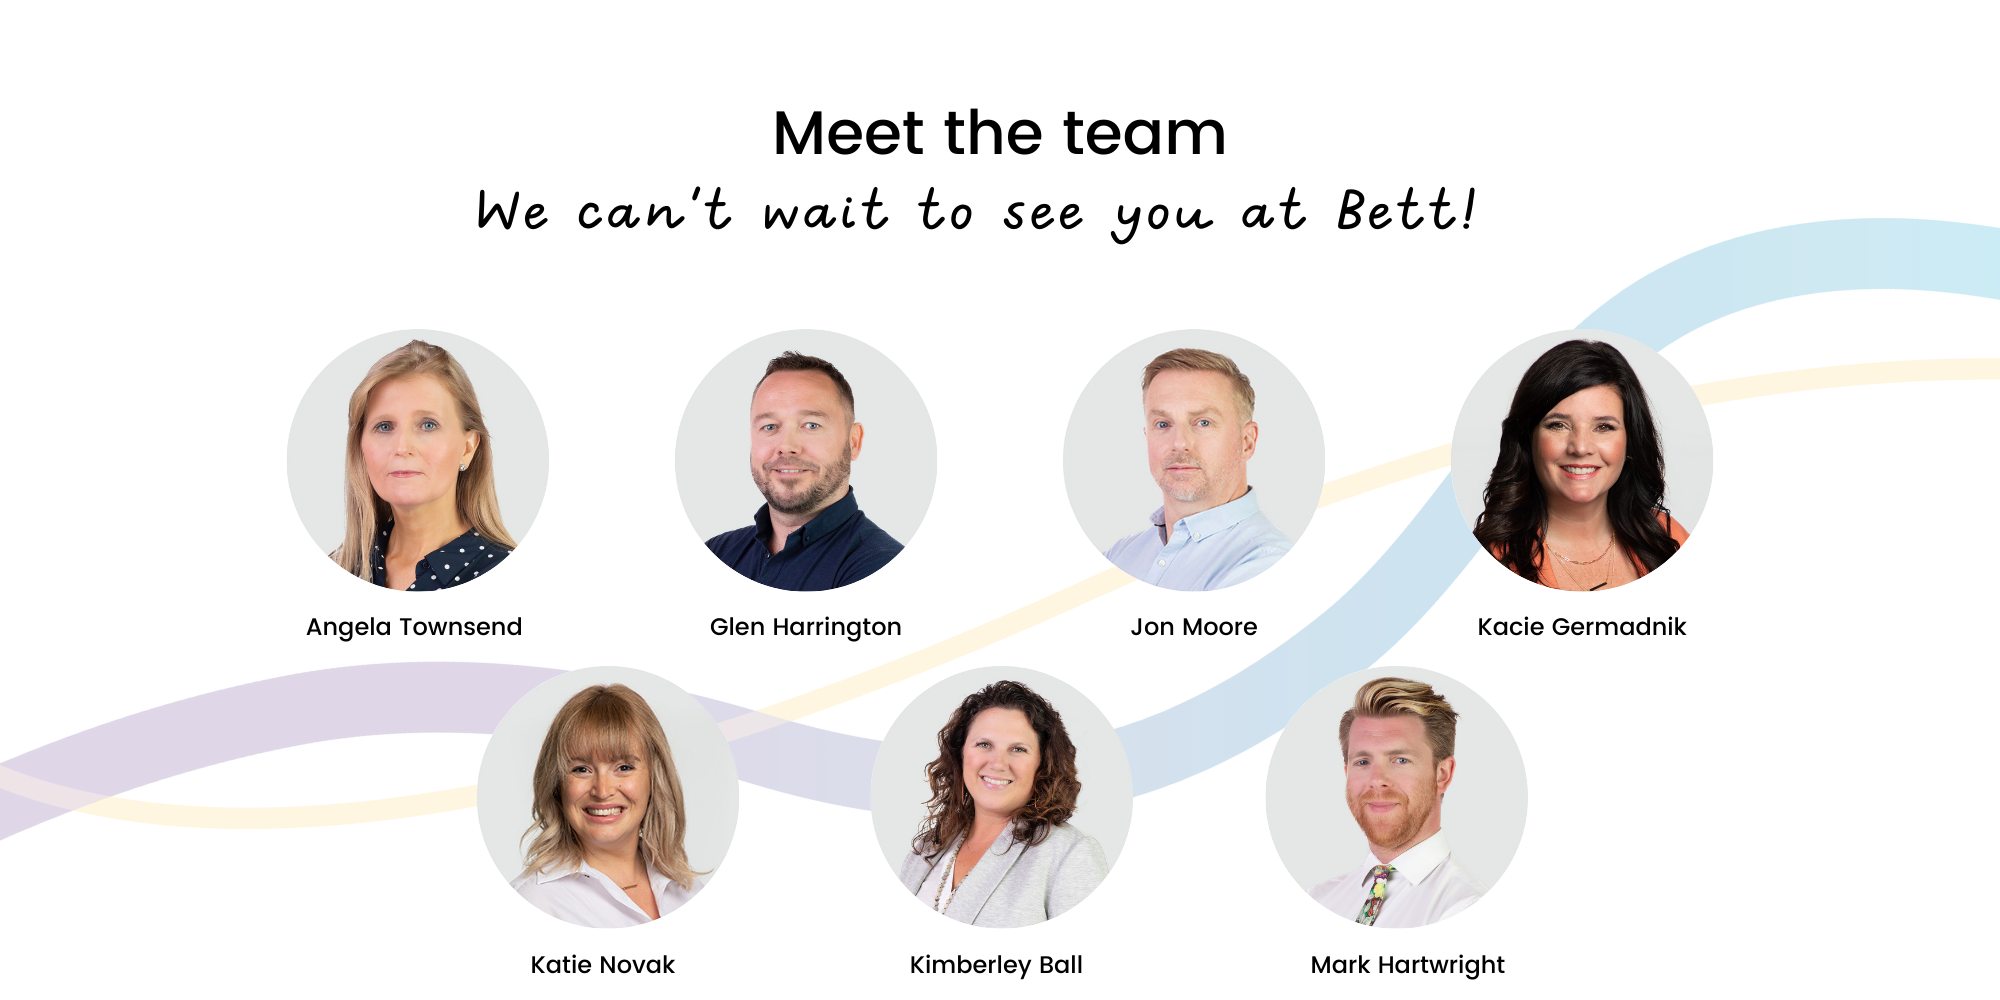 An image showing the team members that are coming to BETT 2023